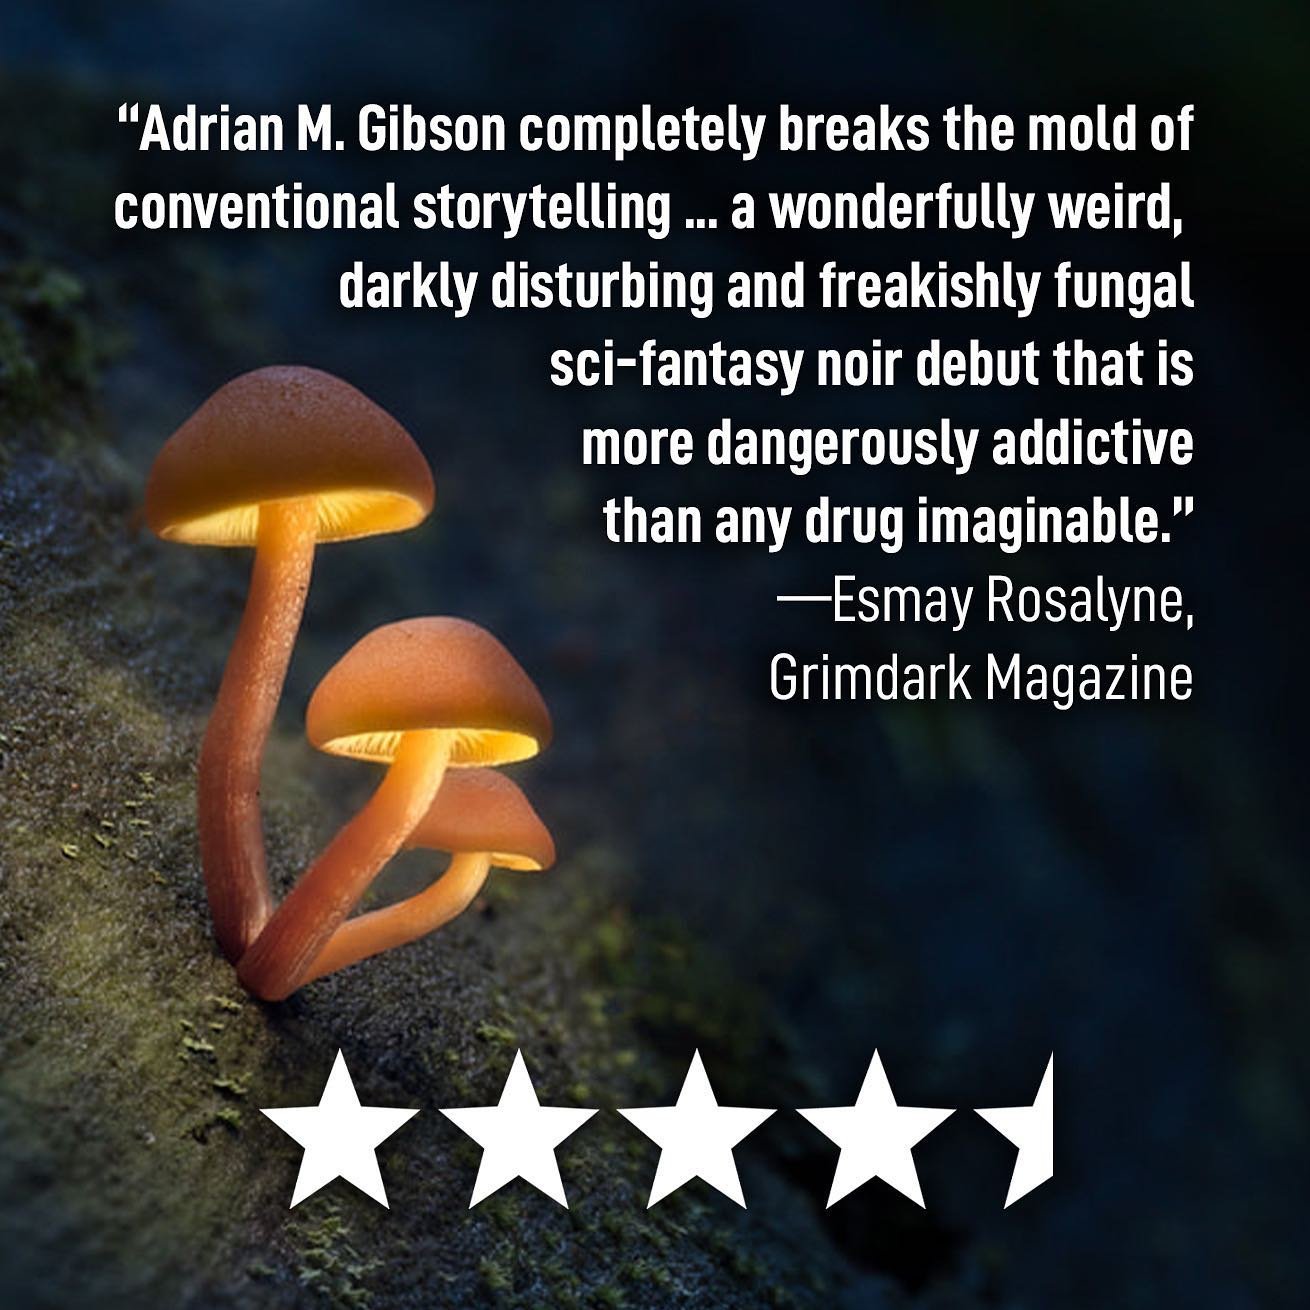 This 4.5⭐️ review of Mushroom Blues by @esmayrosalyne still makes me smile each time I read it. Read the full review on @grimdark.magazine.

BUY IT TODAY in paperback/hardcover/eBook on Amazon or read it FREE on Kindle Unlimited.
&bull;
&bull;
&bull;